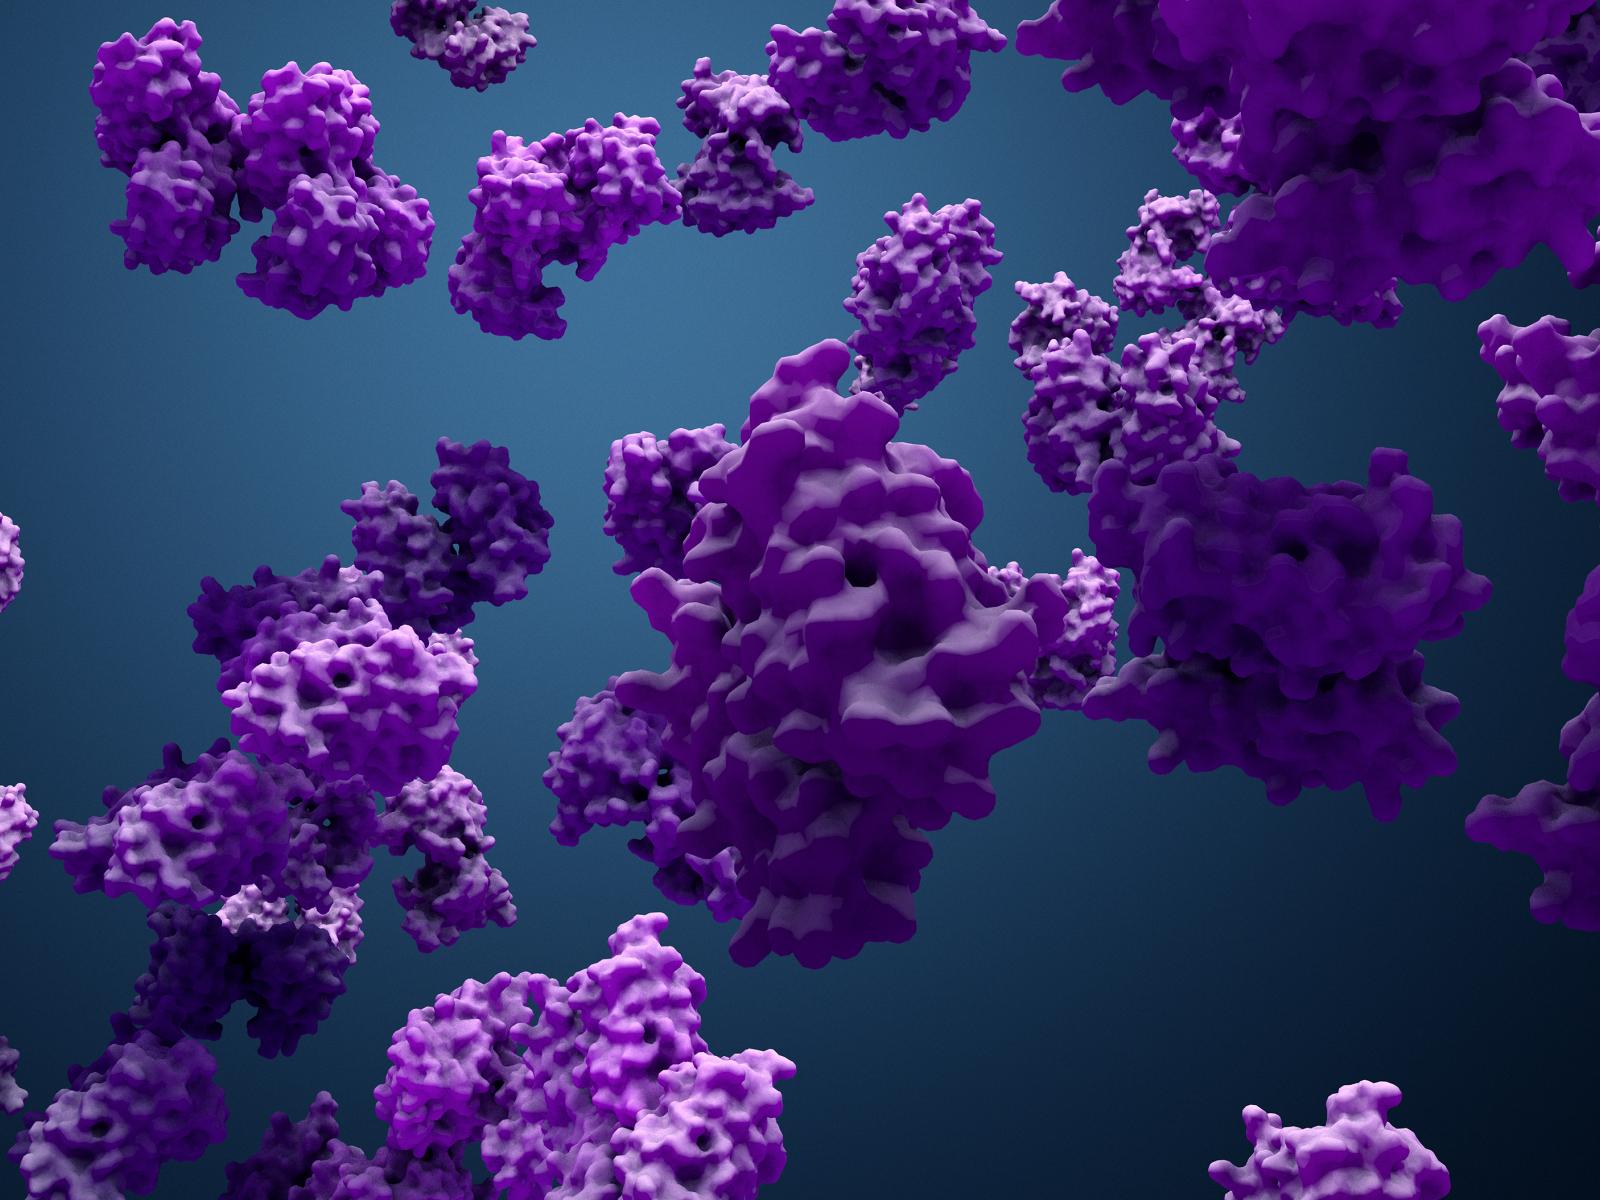 Researchers studied enzymes from the microbe Clostridium pasteurianum to try and find out what drives the phenomenon known as catalytic bias. Image credit | Shutterstock